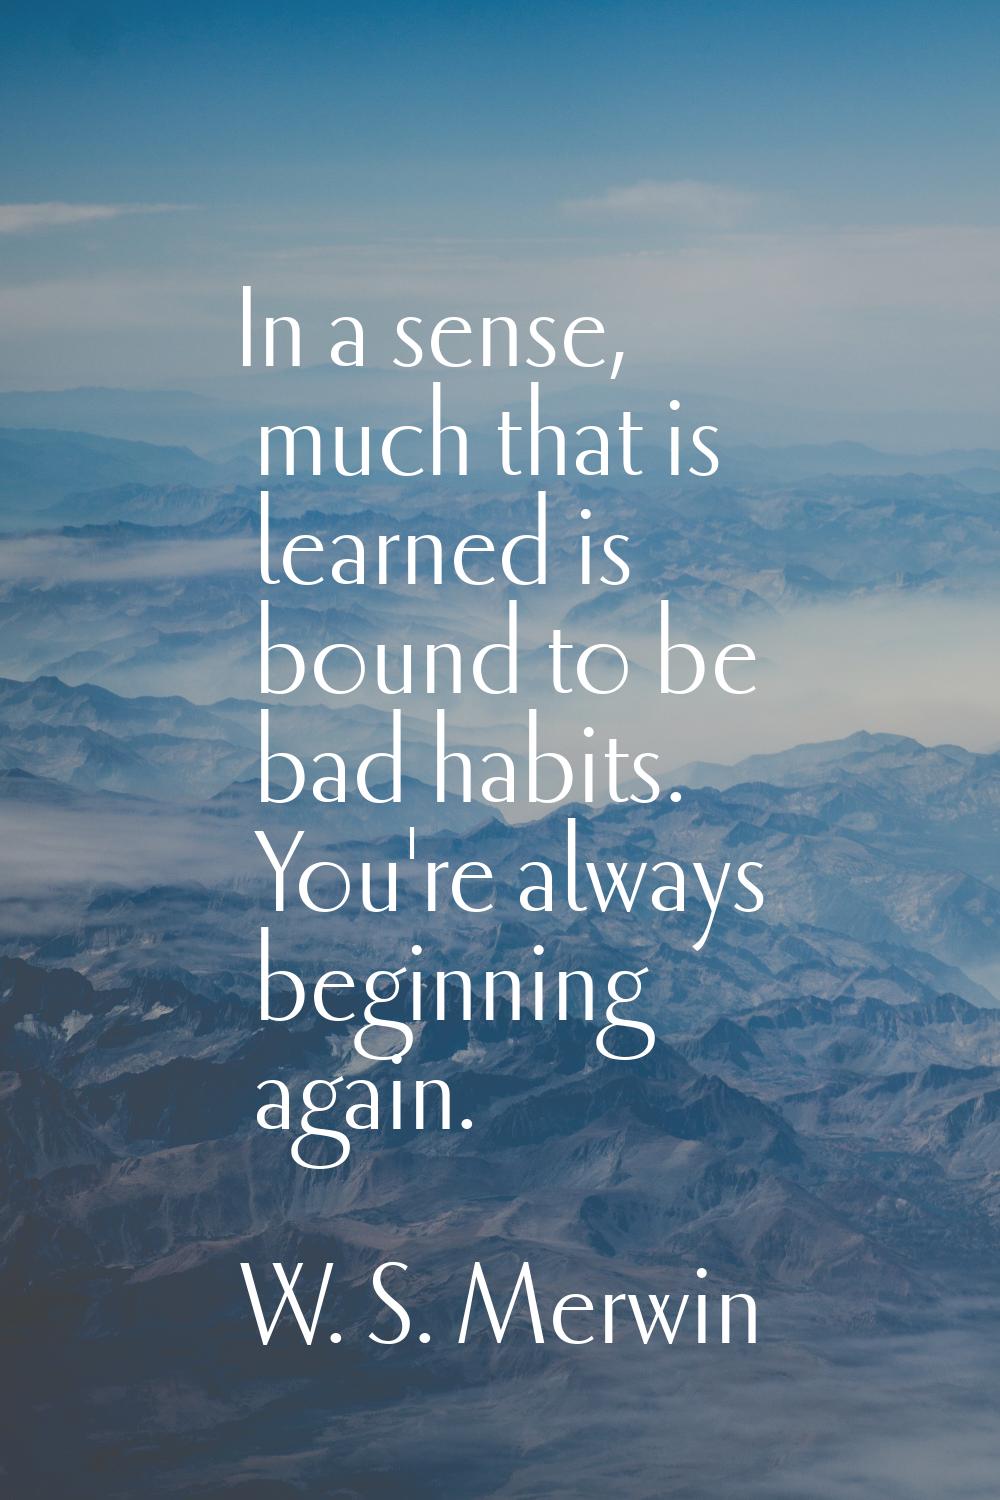 In a sense, much that is learned is bound to be bad habits. You're always beginning again.